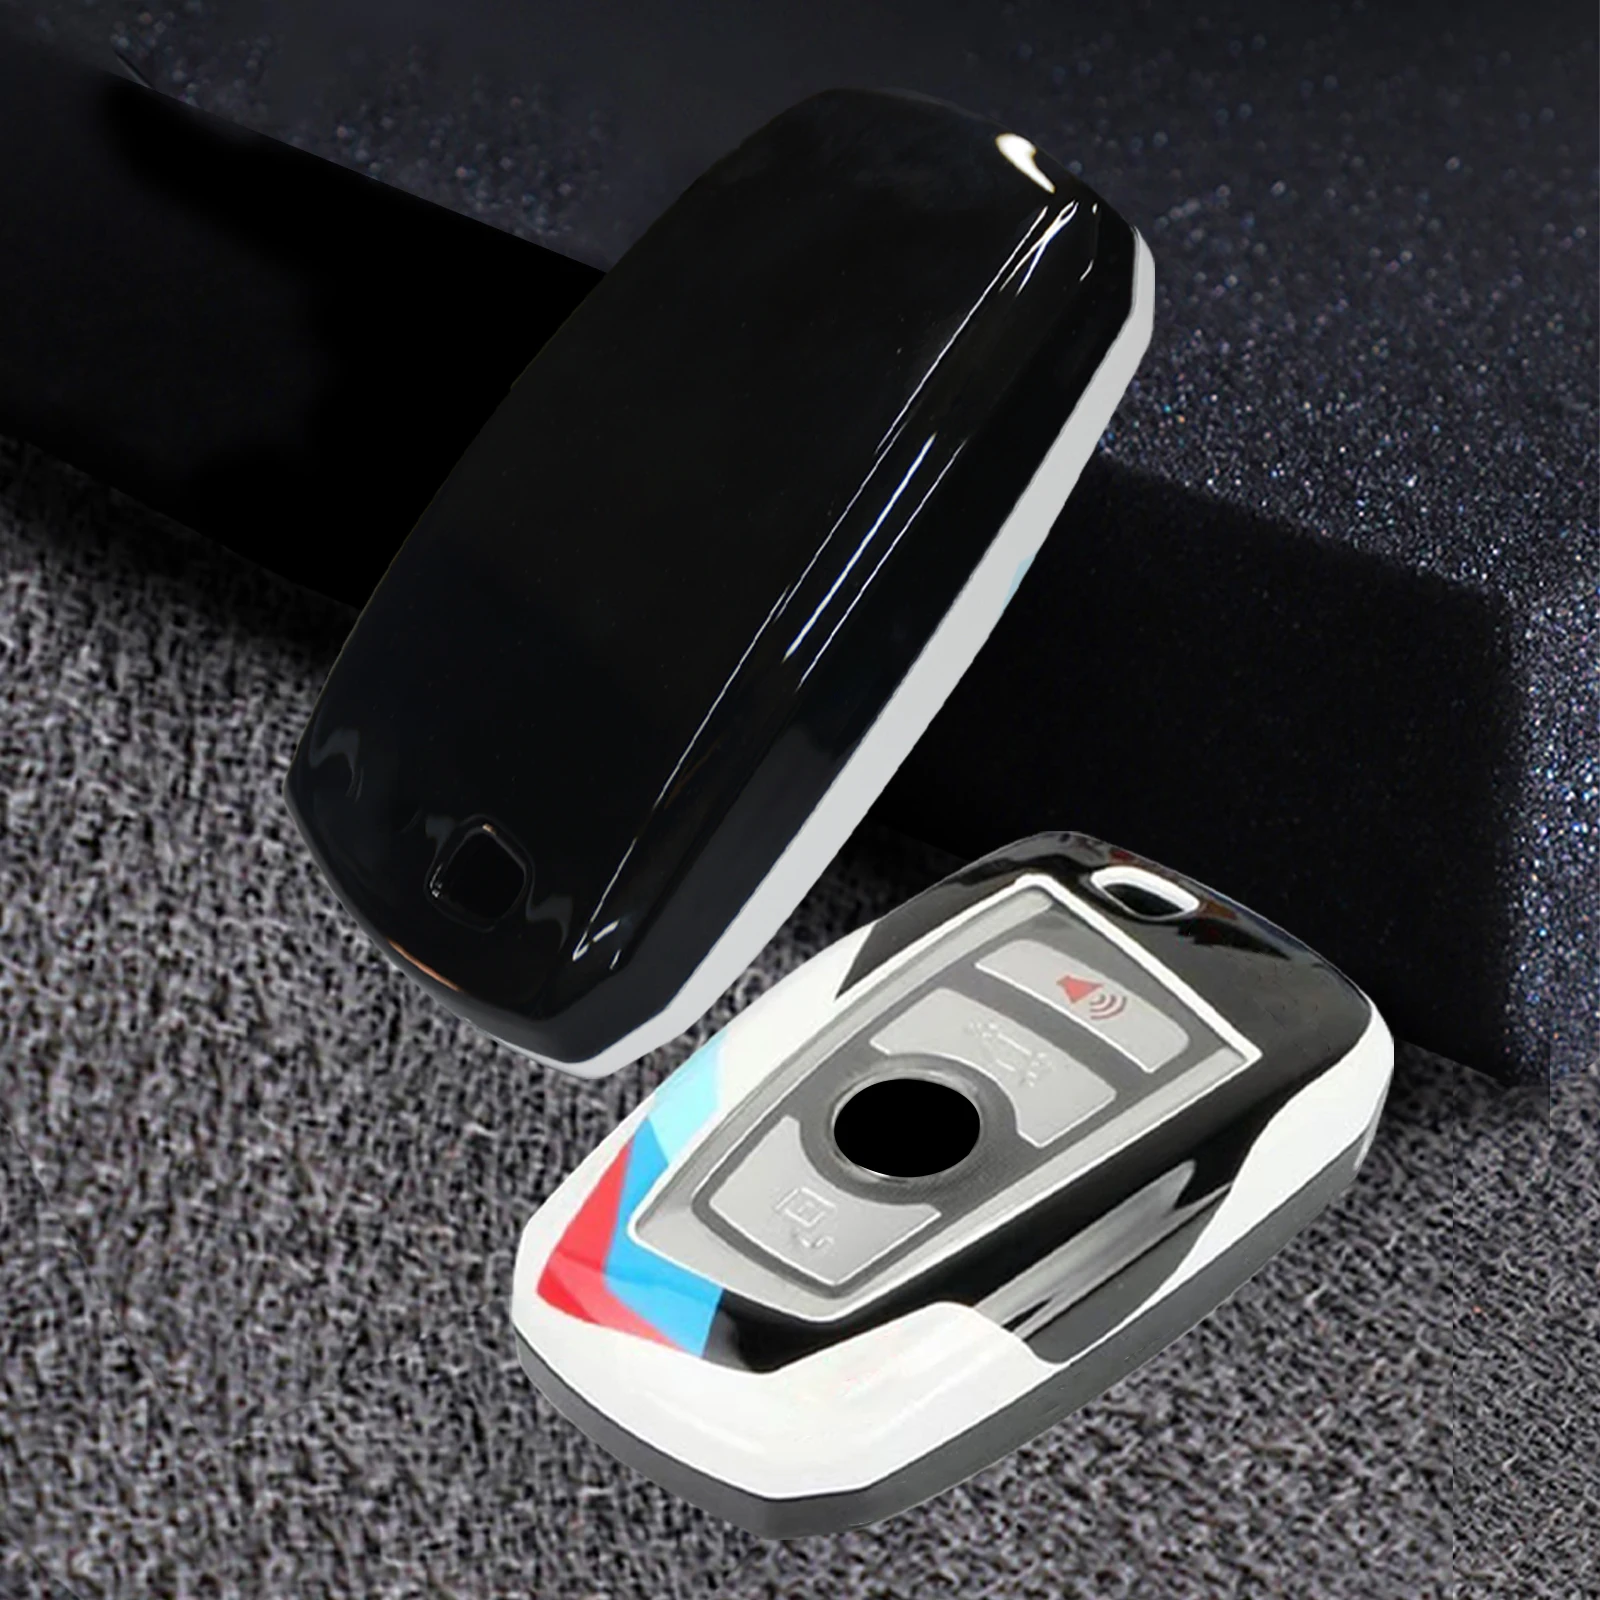 

New Smart Magnetic Type Key Fob Case Cover Shell For Bmw F10 F12 F20 F25 F26 F20 F32 F01 F02 M2 M3 M4 M5 M6 3 5 7 X3 X4 Series